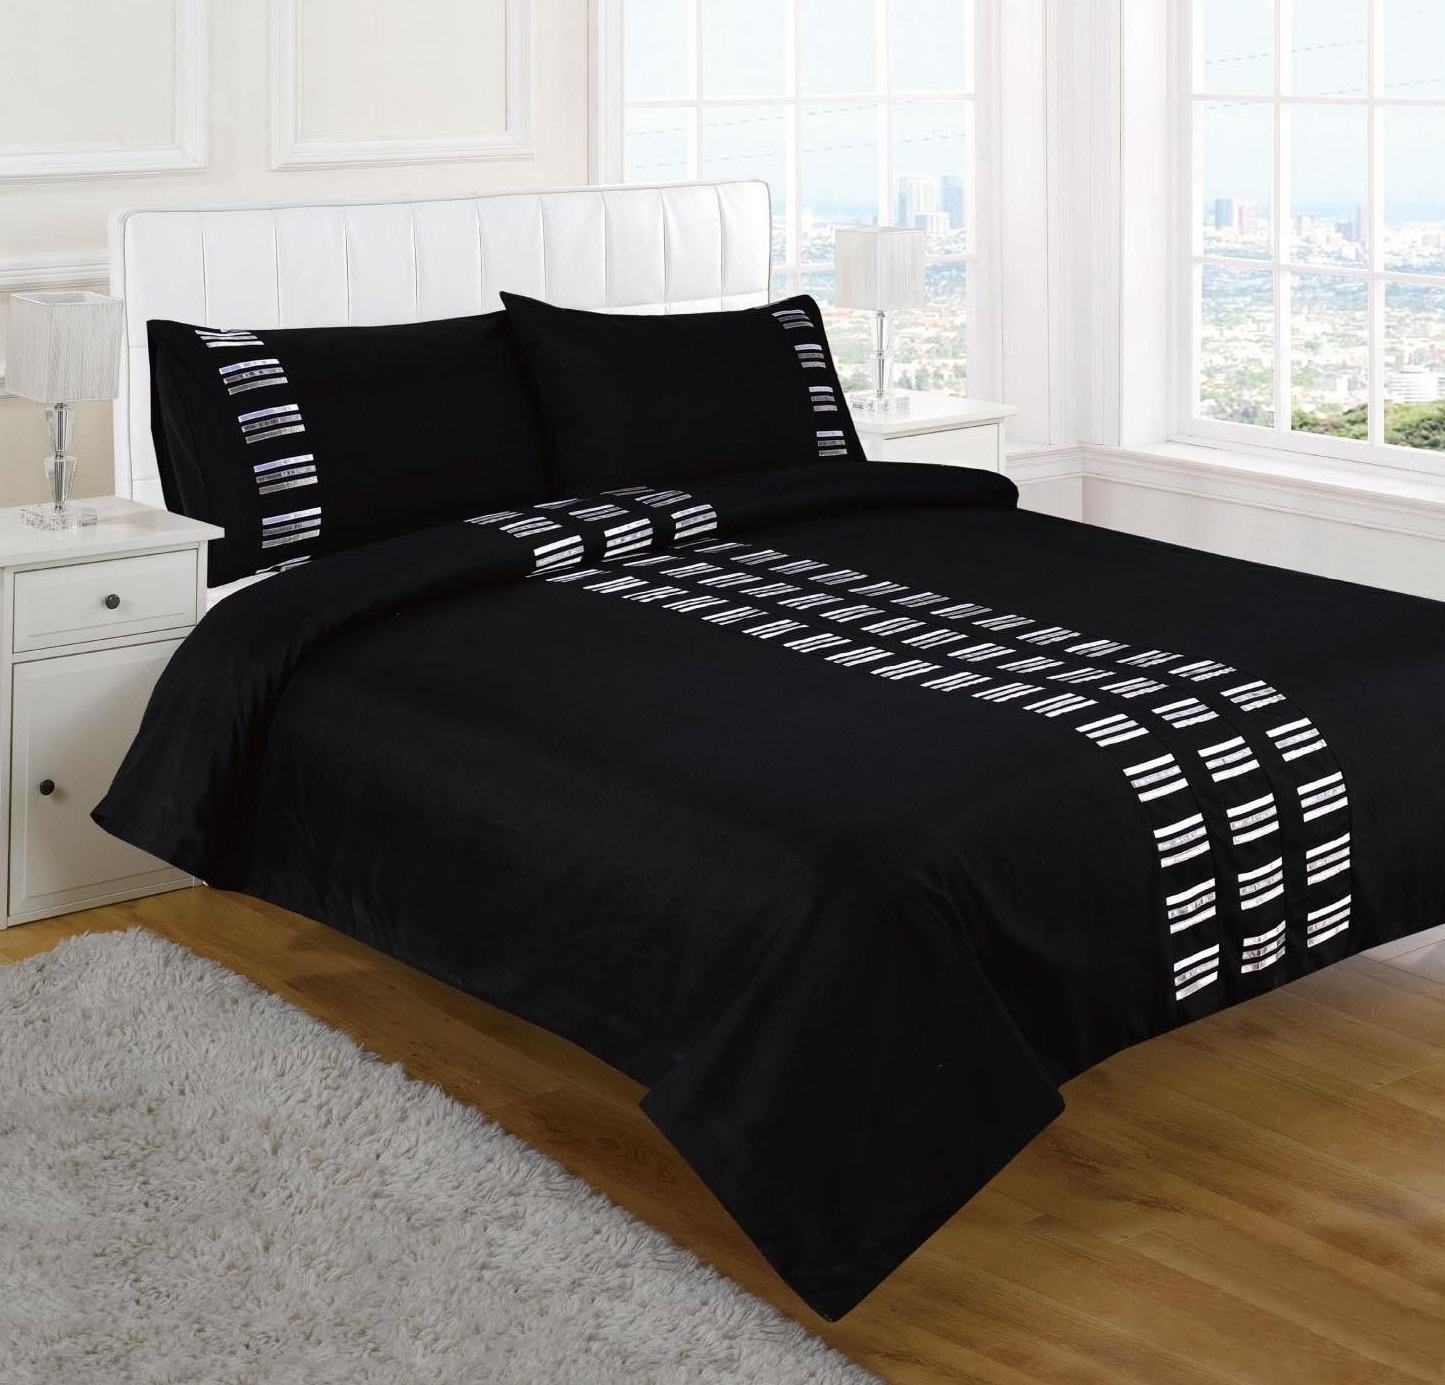 Black And Covers Terrific Black And White Duvet Covers In Renzo Cushion Cover Black Installed With White Nightstand And White Table Lamp On Wooden Floor Architecture Cozy Black And White Duvet Covers Collection For Comfortable Bedrooms